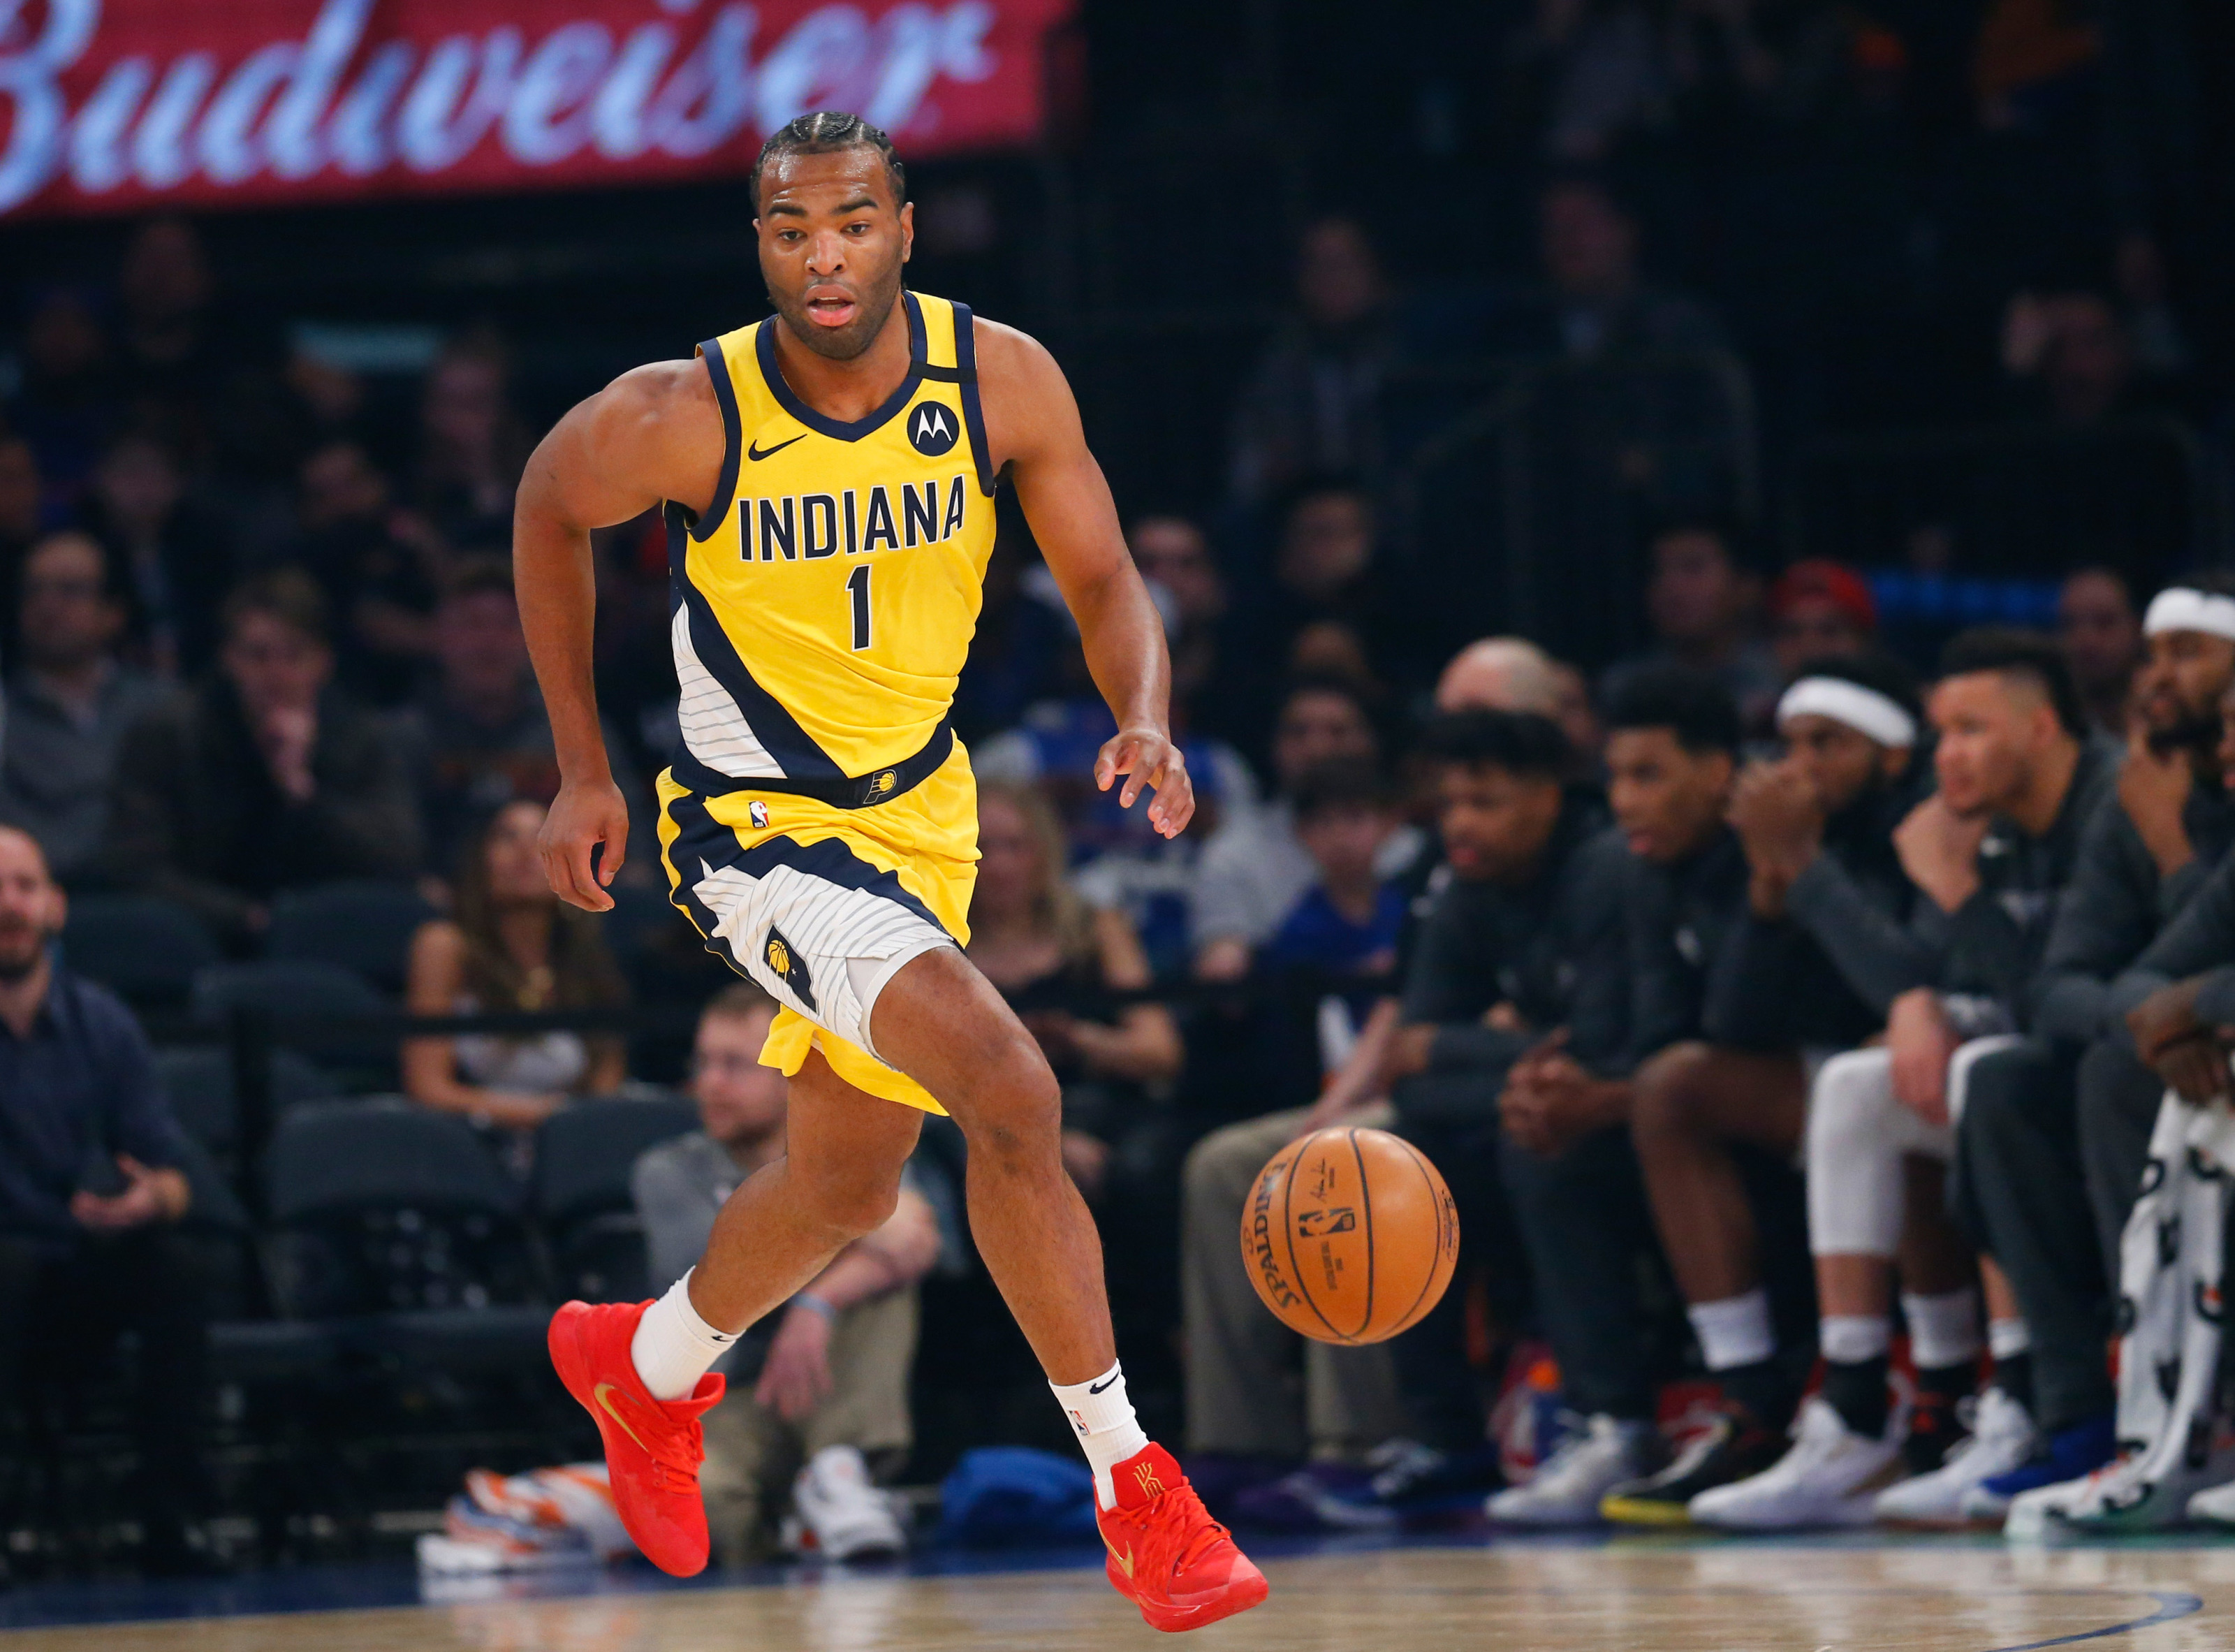 NBA Injury News: T.J. Warren's Status For The Bucks-Pacers Game On